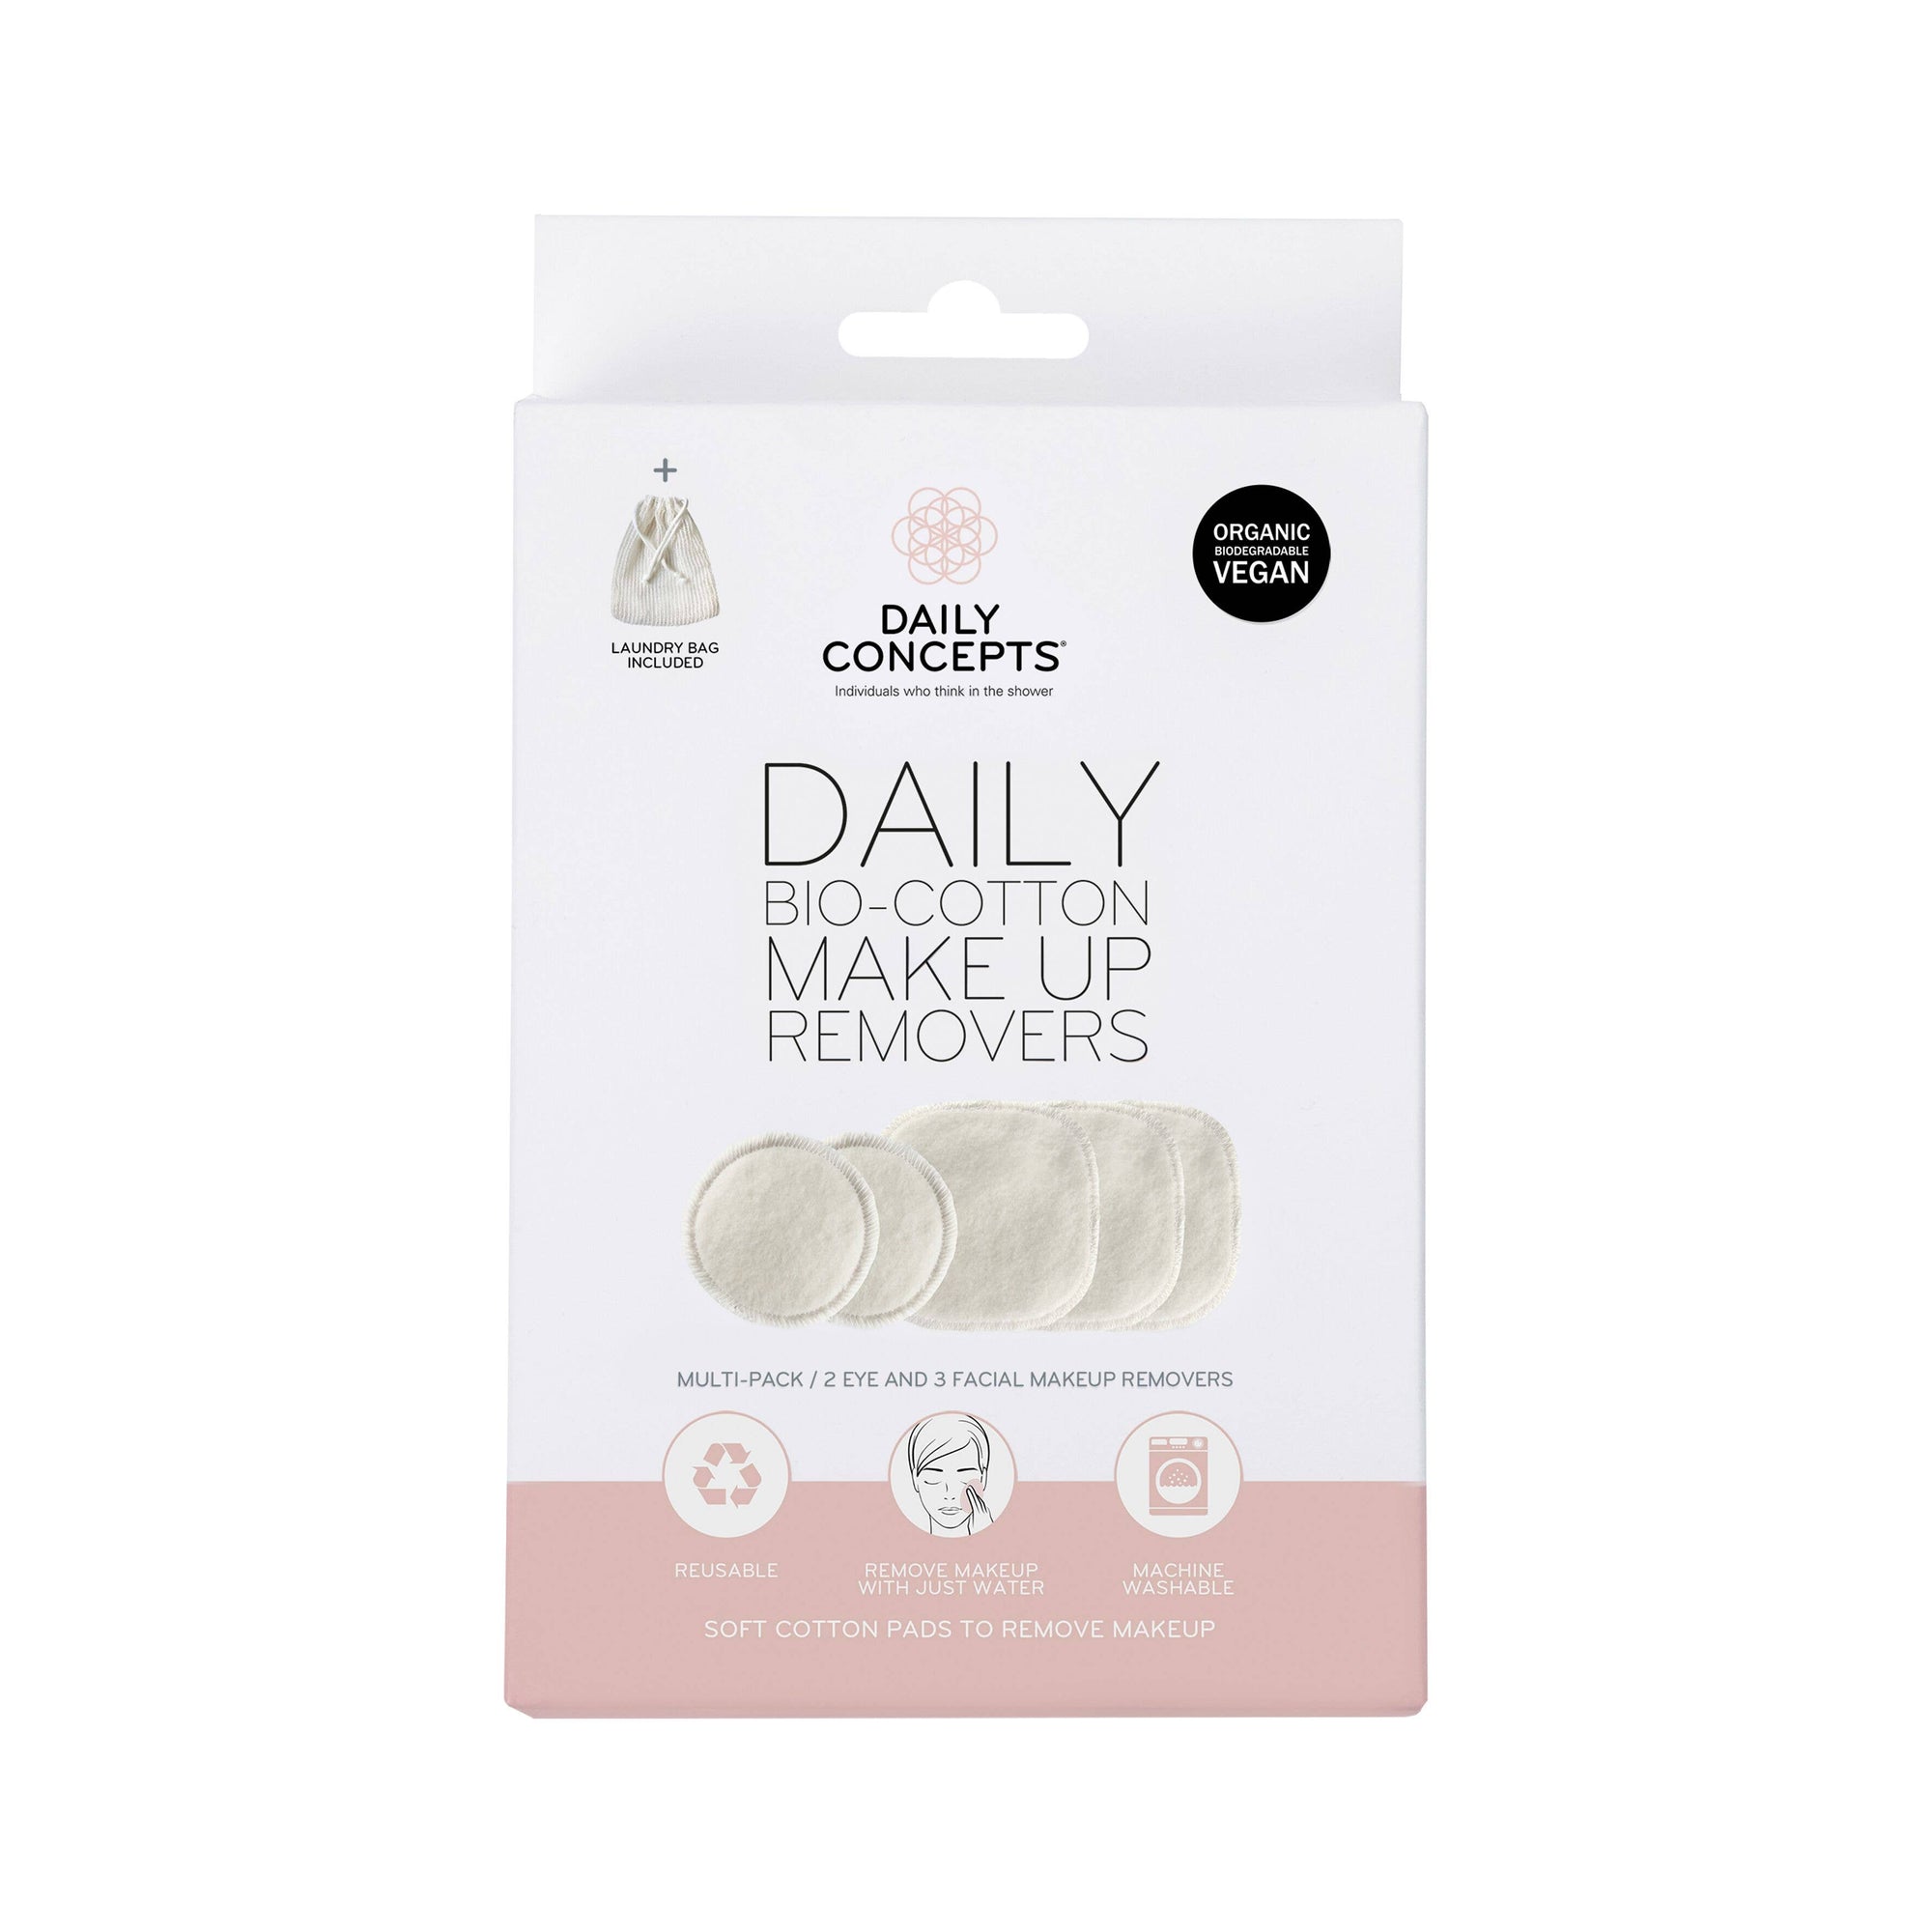 Daily Bio-Cotton Makeup Removers